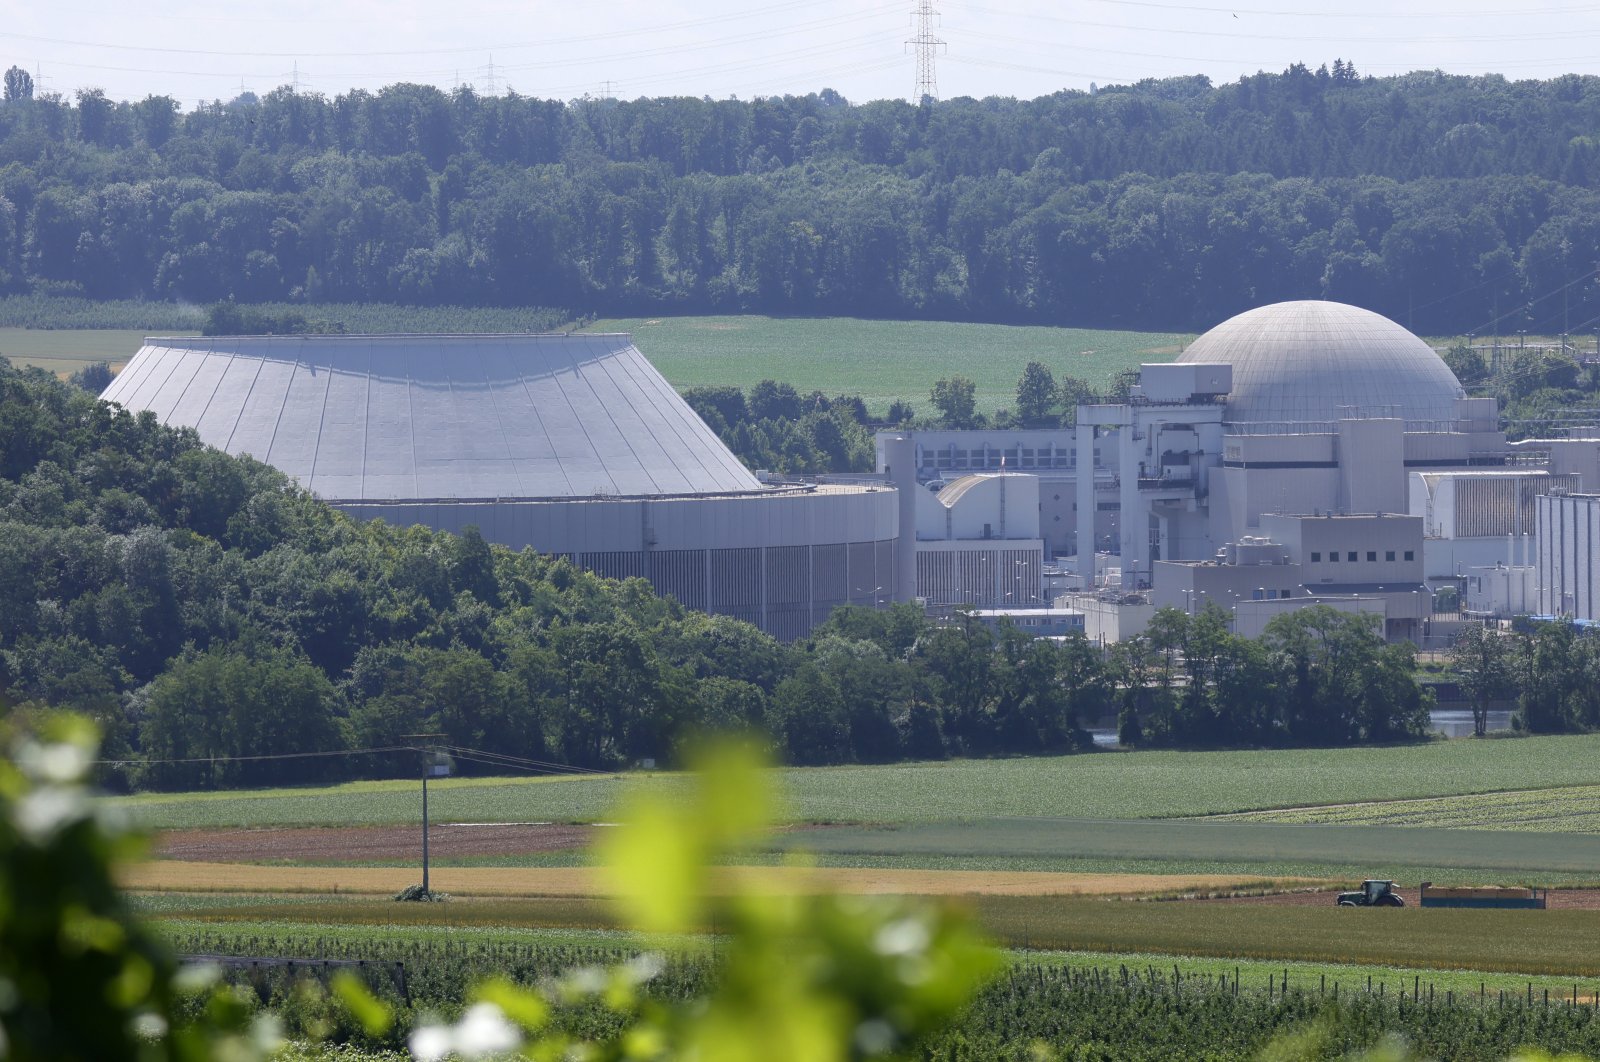 The nuclear power plant in Neckarwestheim, Germany, June 23, 2022. (EPA Photo)